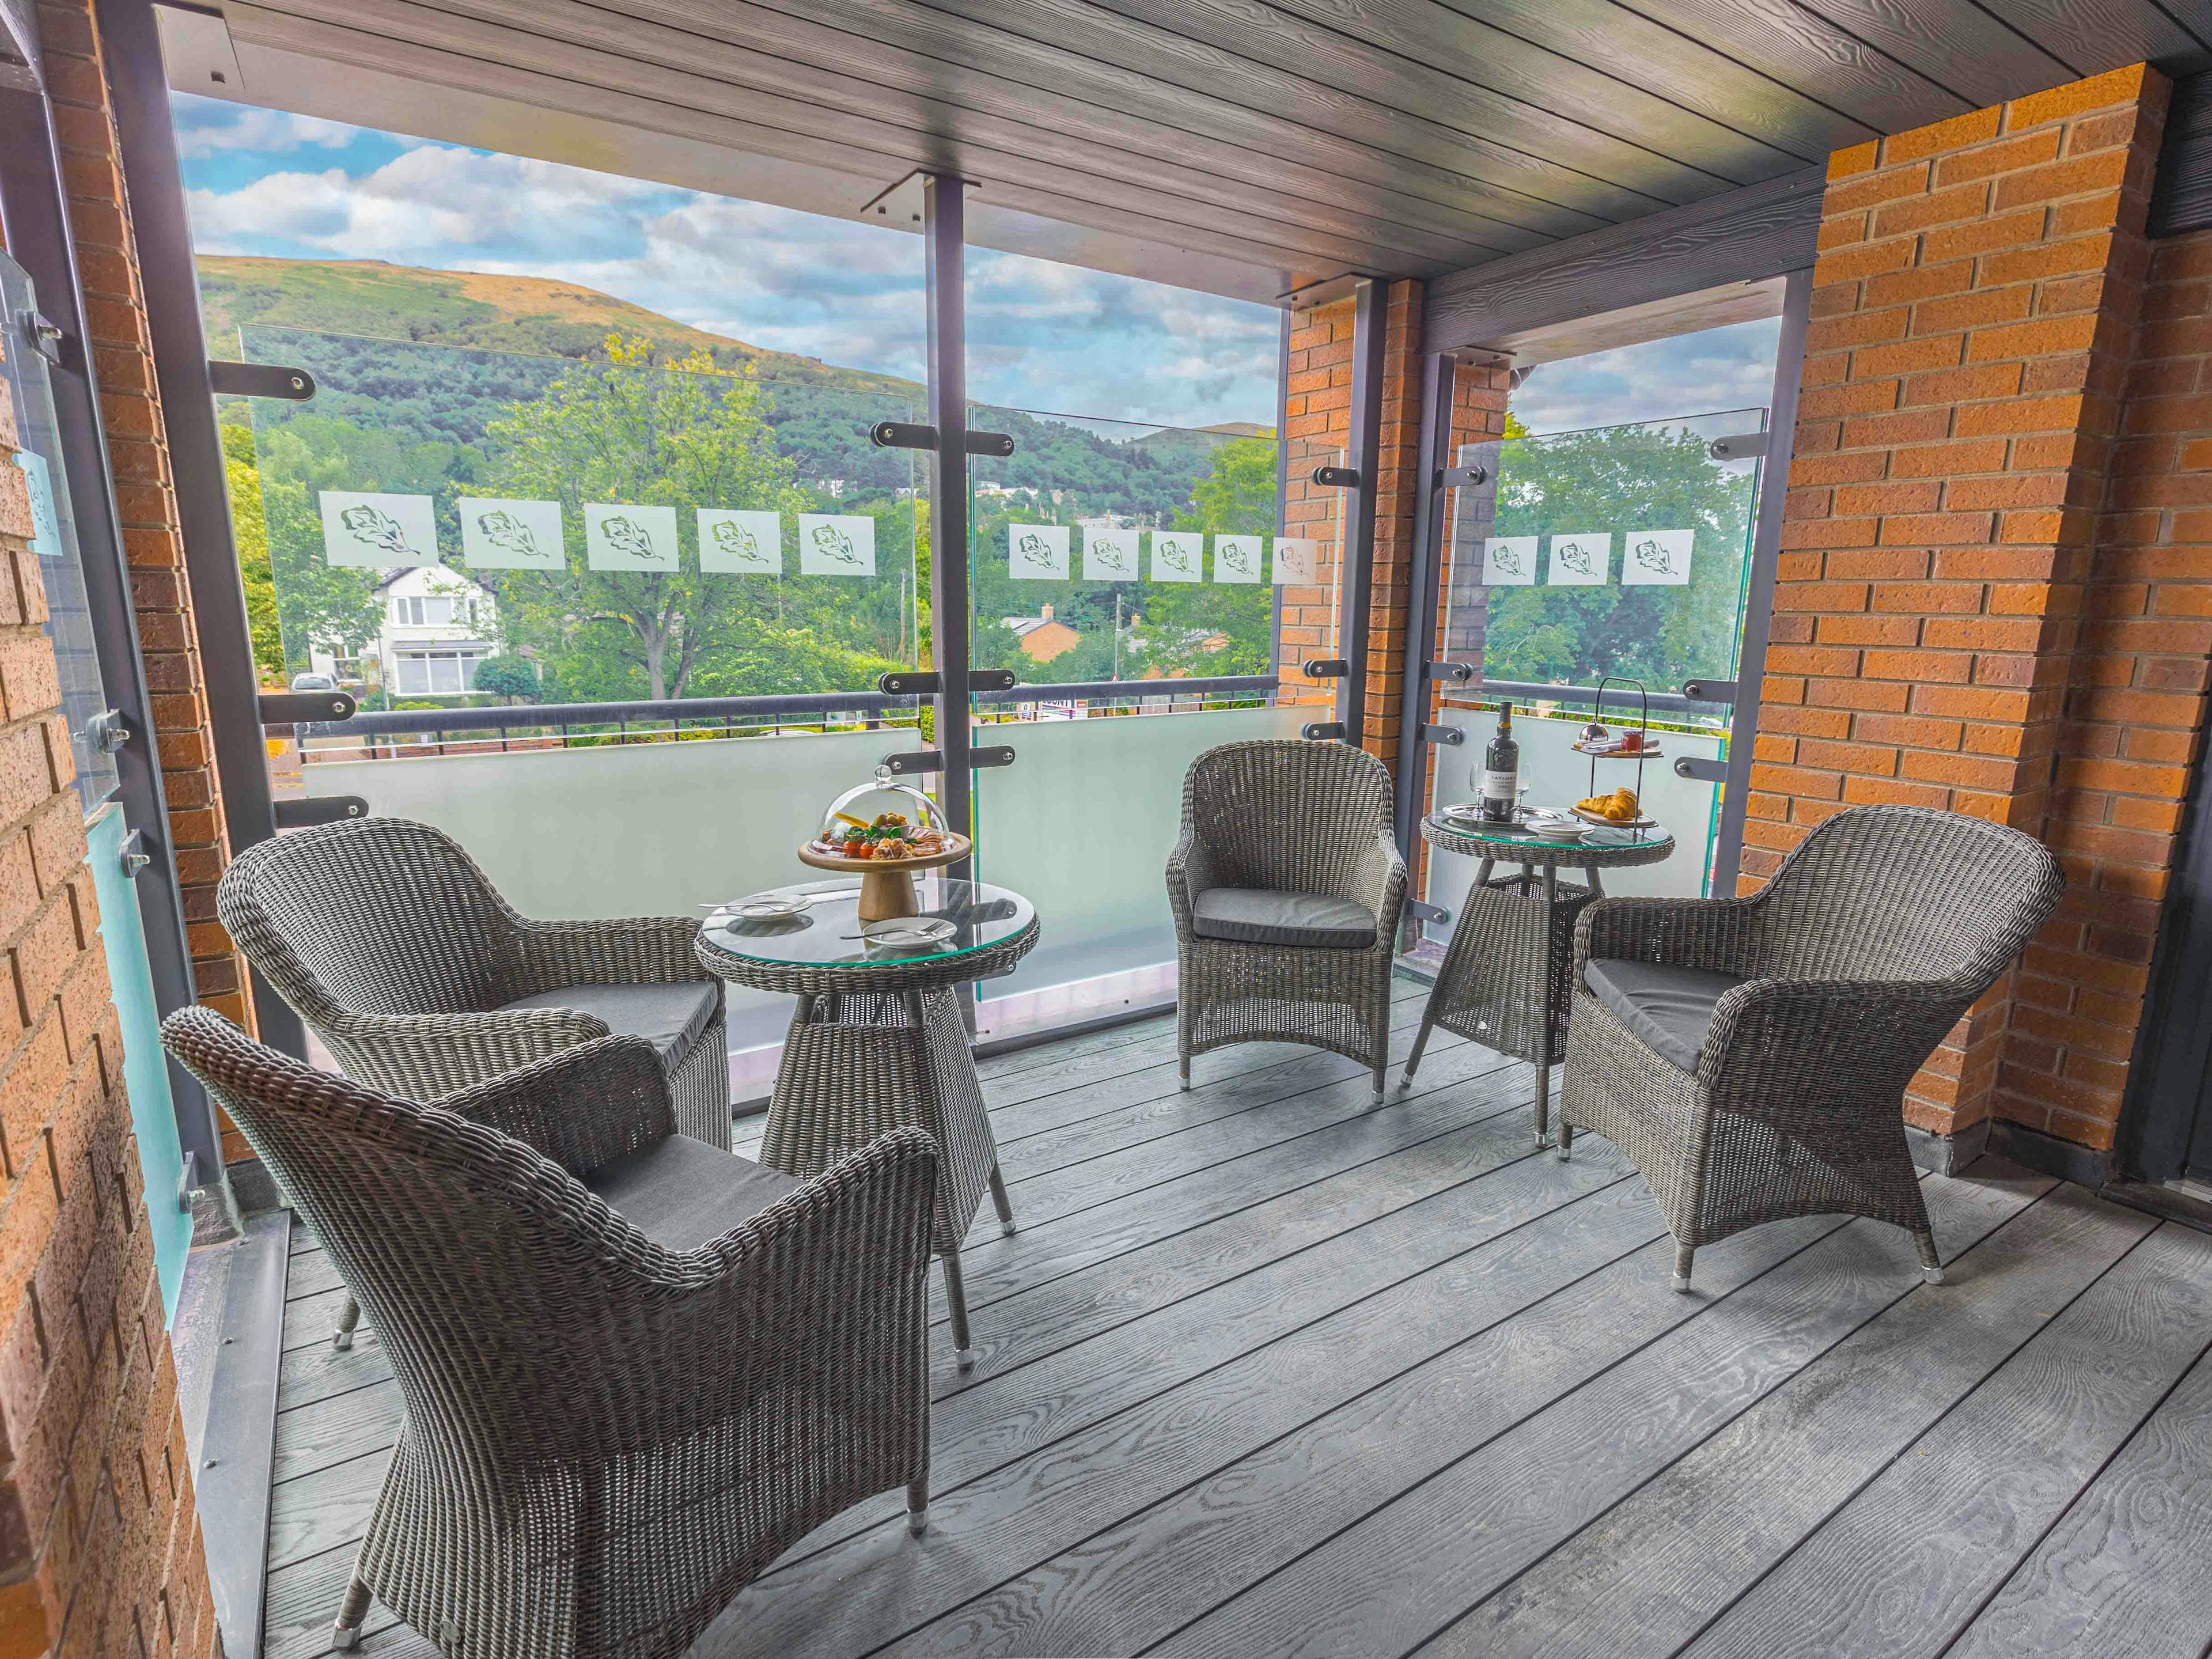 Outdoor Area at Elgar Court Care Home in Malvern, Worcestershire